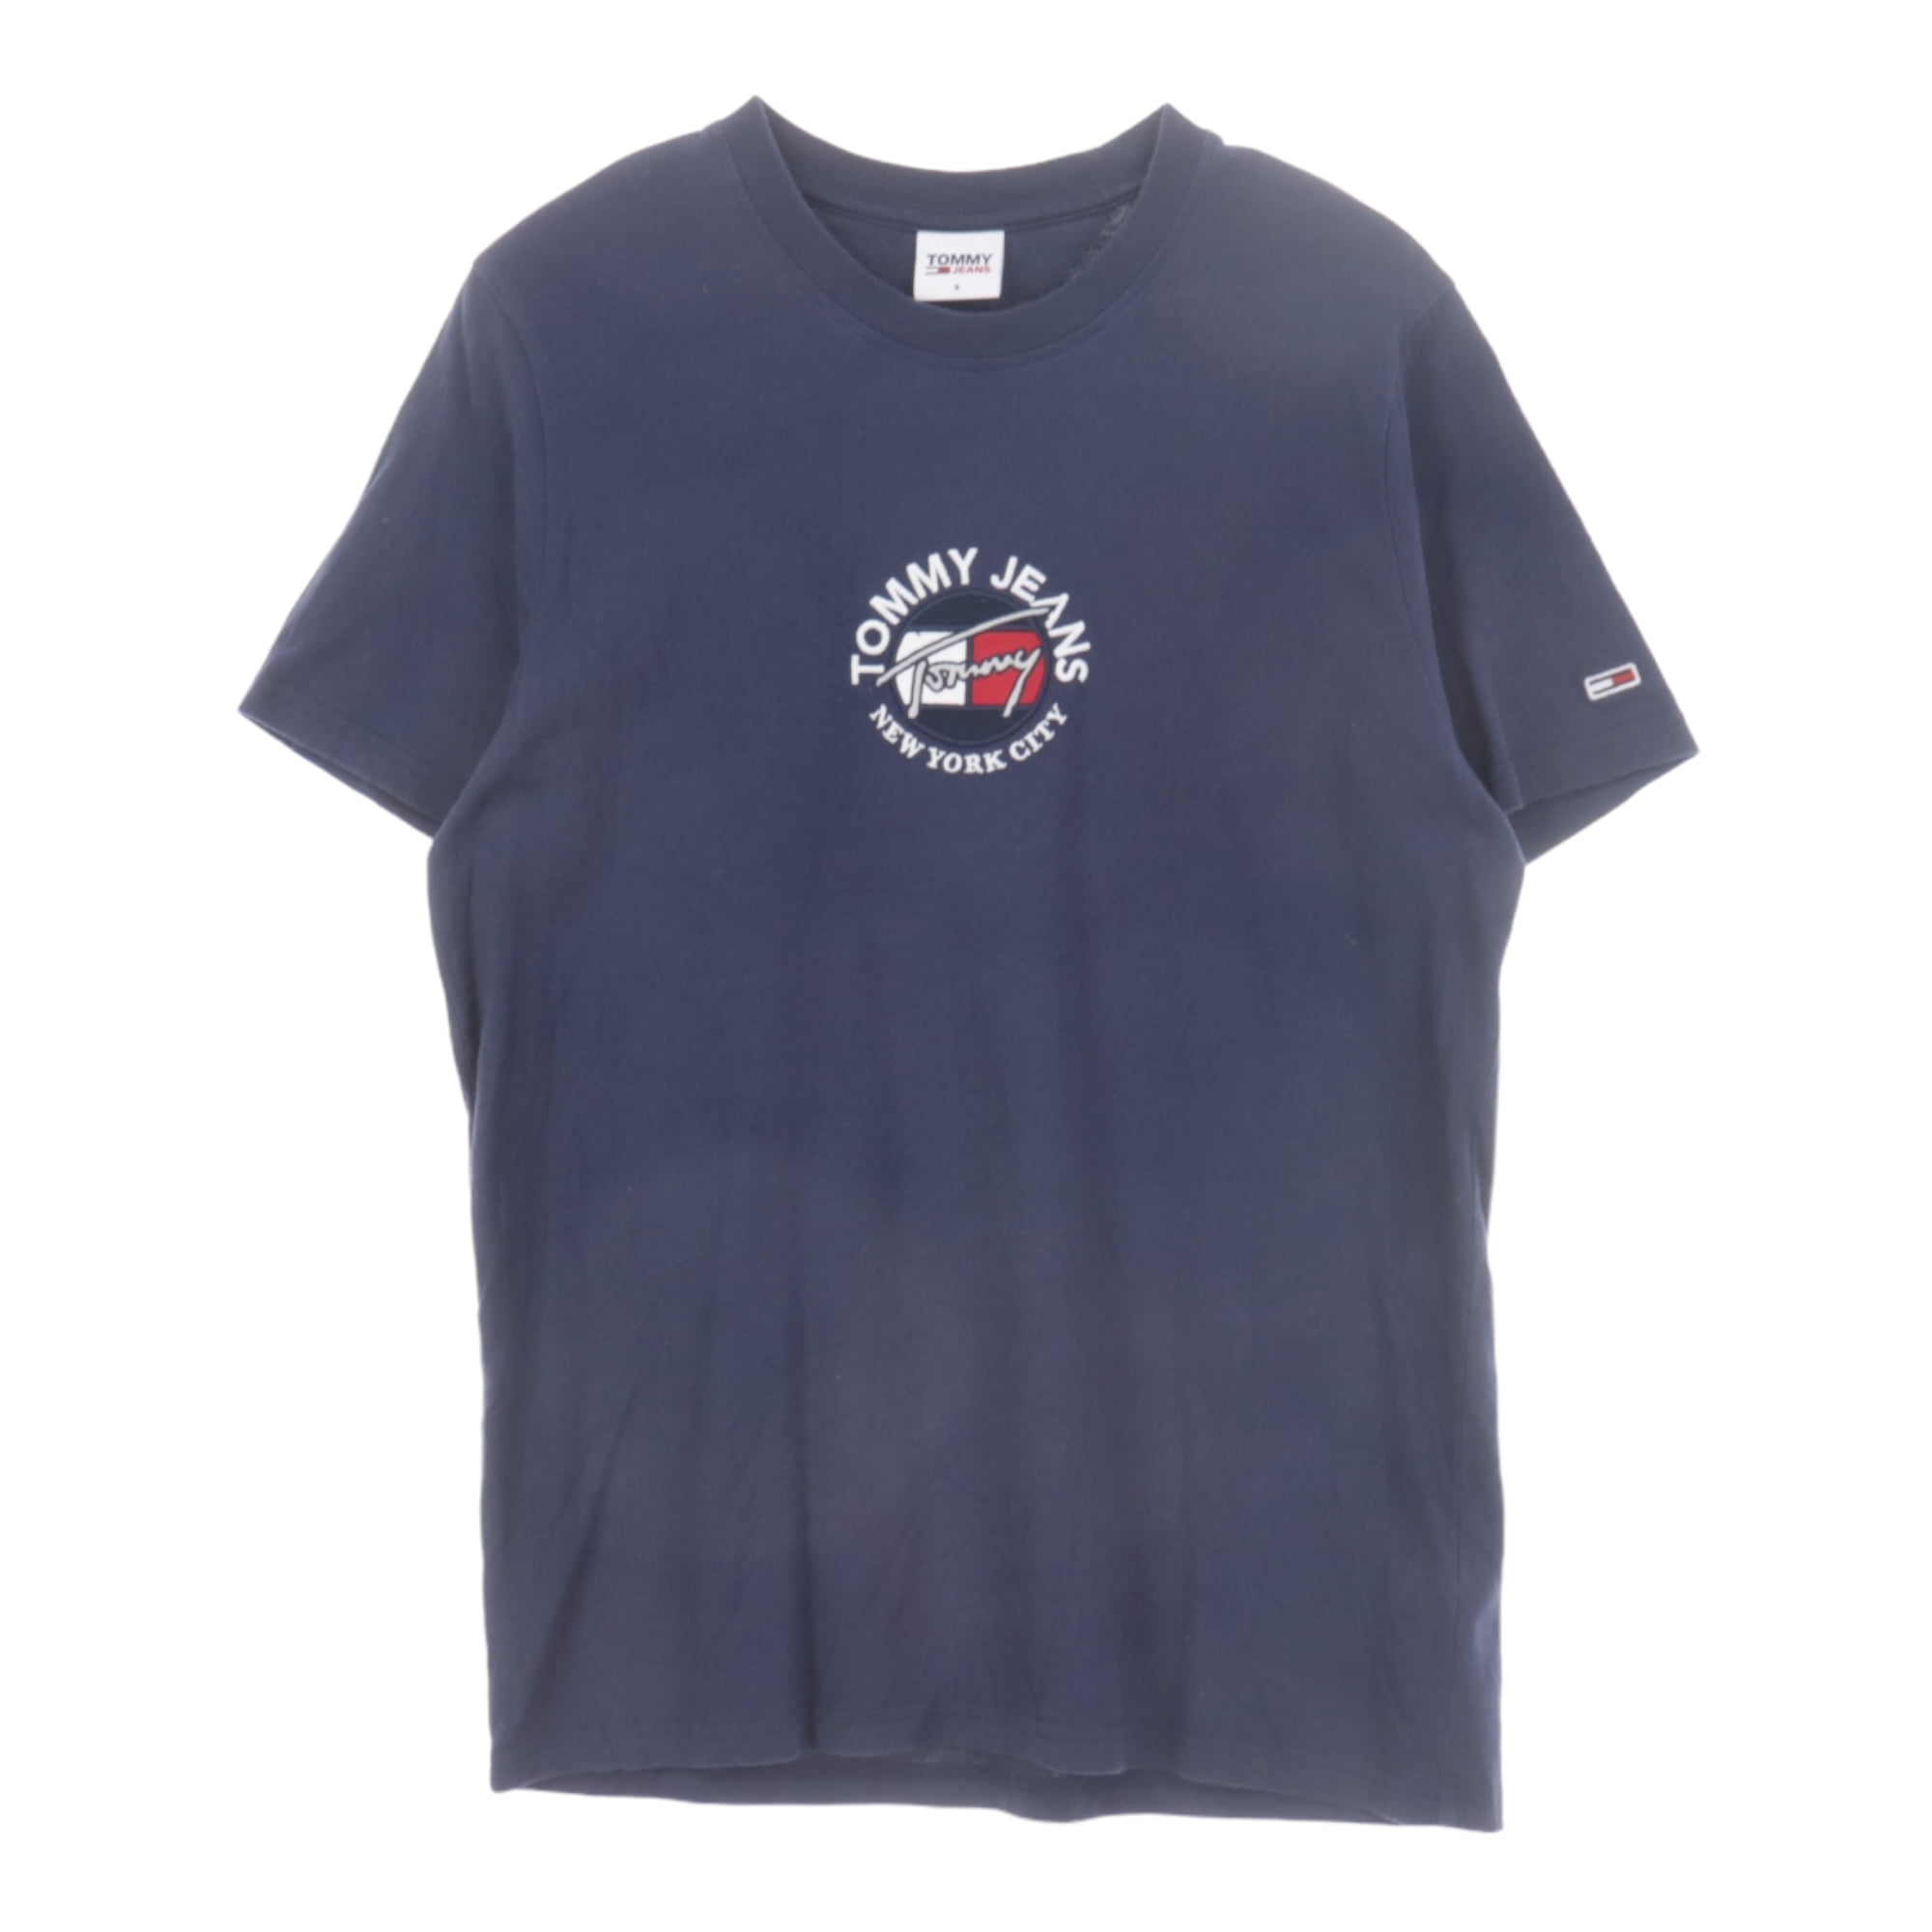 Tommy Jeans,T-Shirts